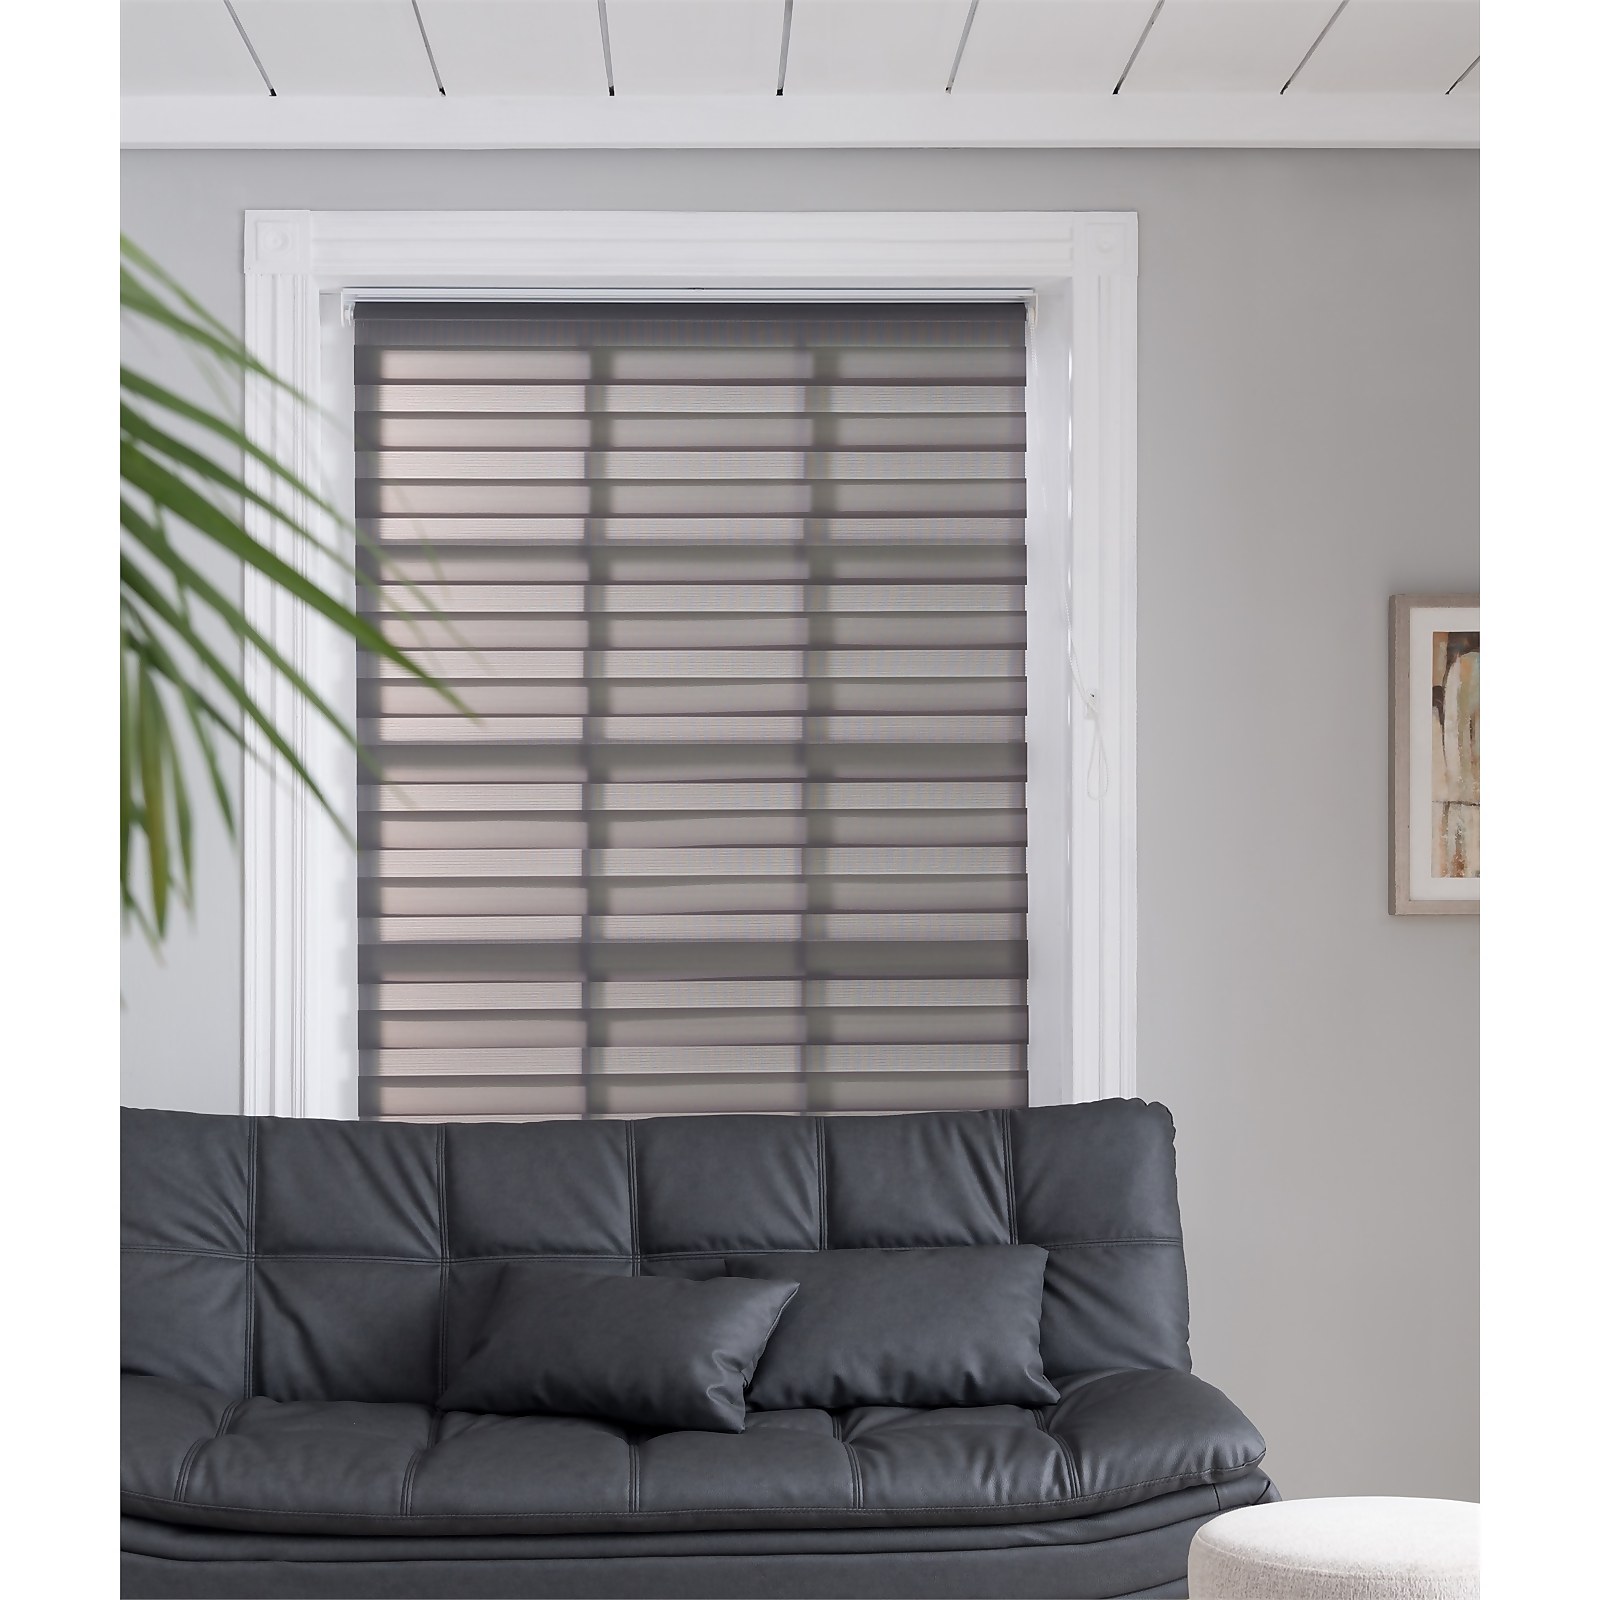 Photo of Night & Day Roller Blind - Dove Grey - 90x160cm